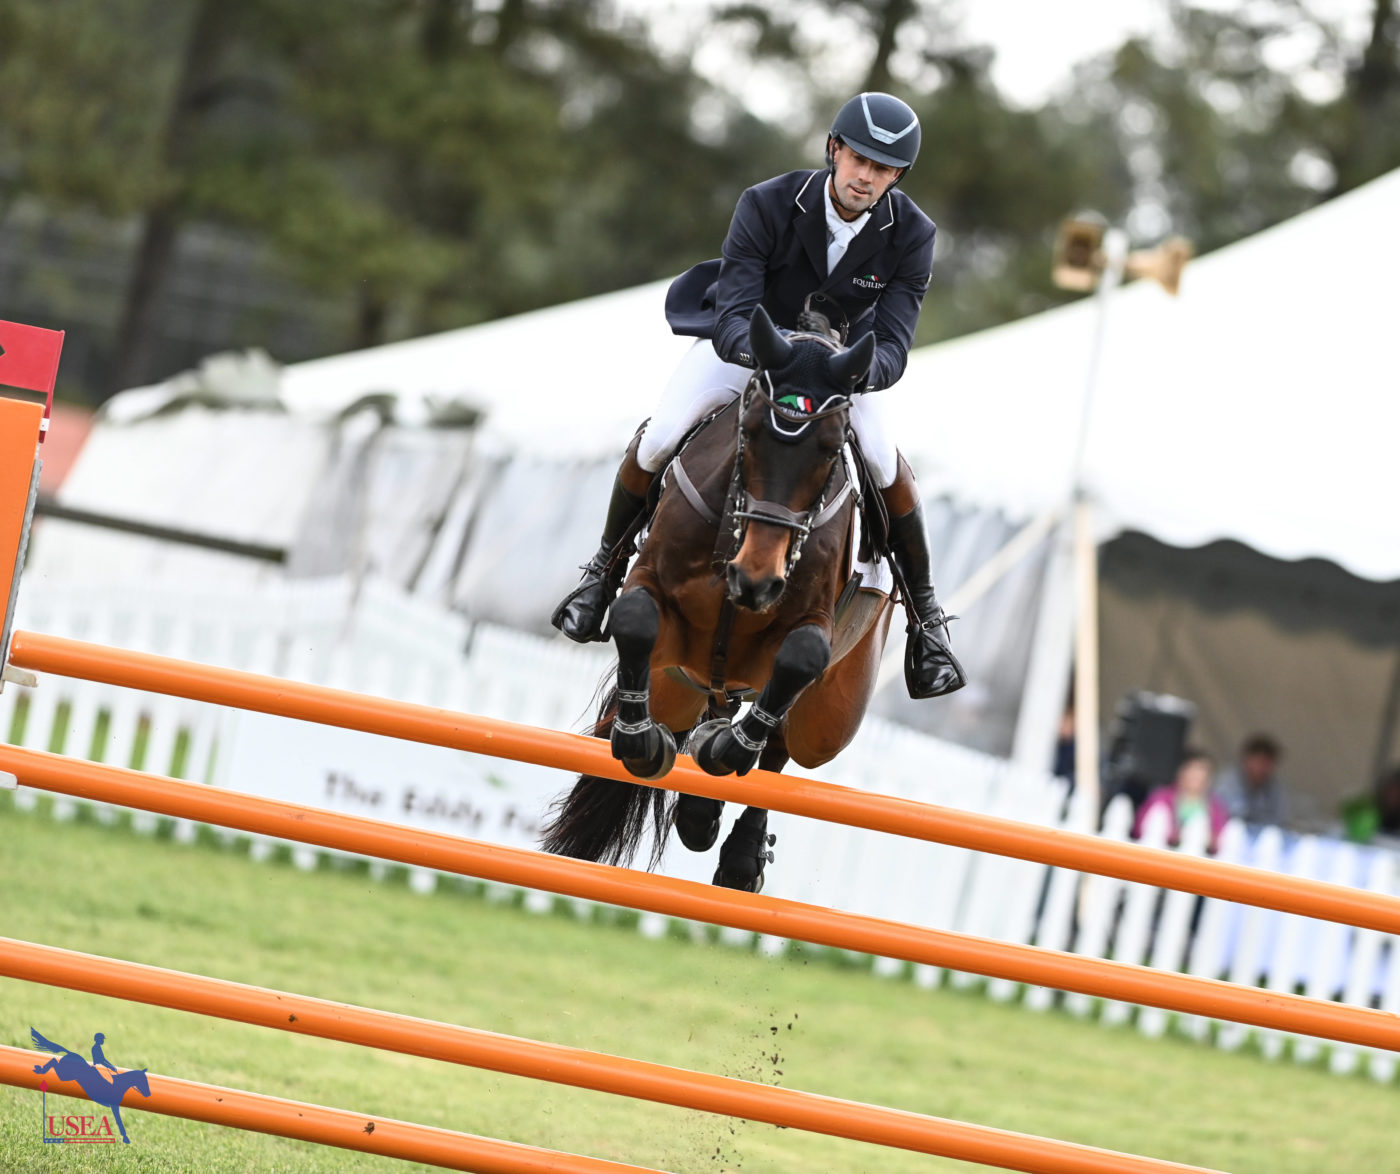 The day's leaders, Will Coleman and Chin Tonic HS, sit poised to earn Coleman his third consecutive CCI4*-S win at Carolina. USEA/Lindsay Berreth photo